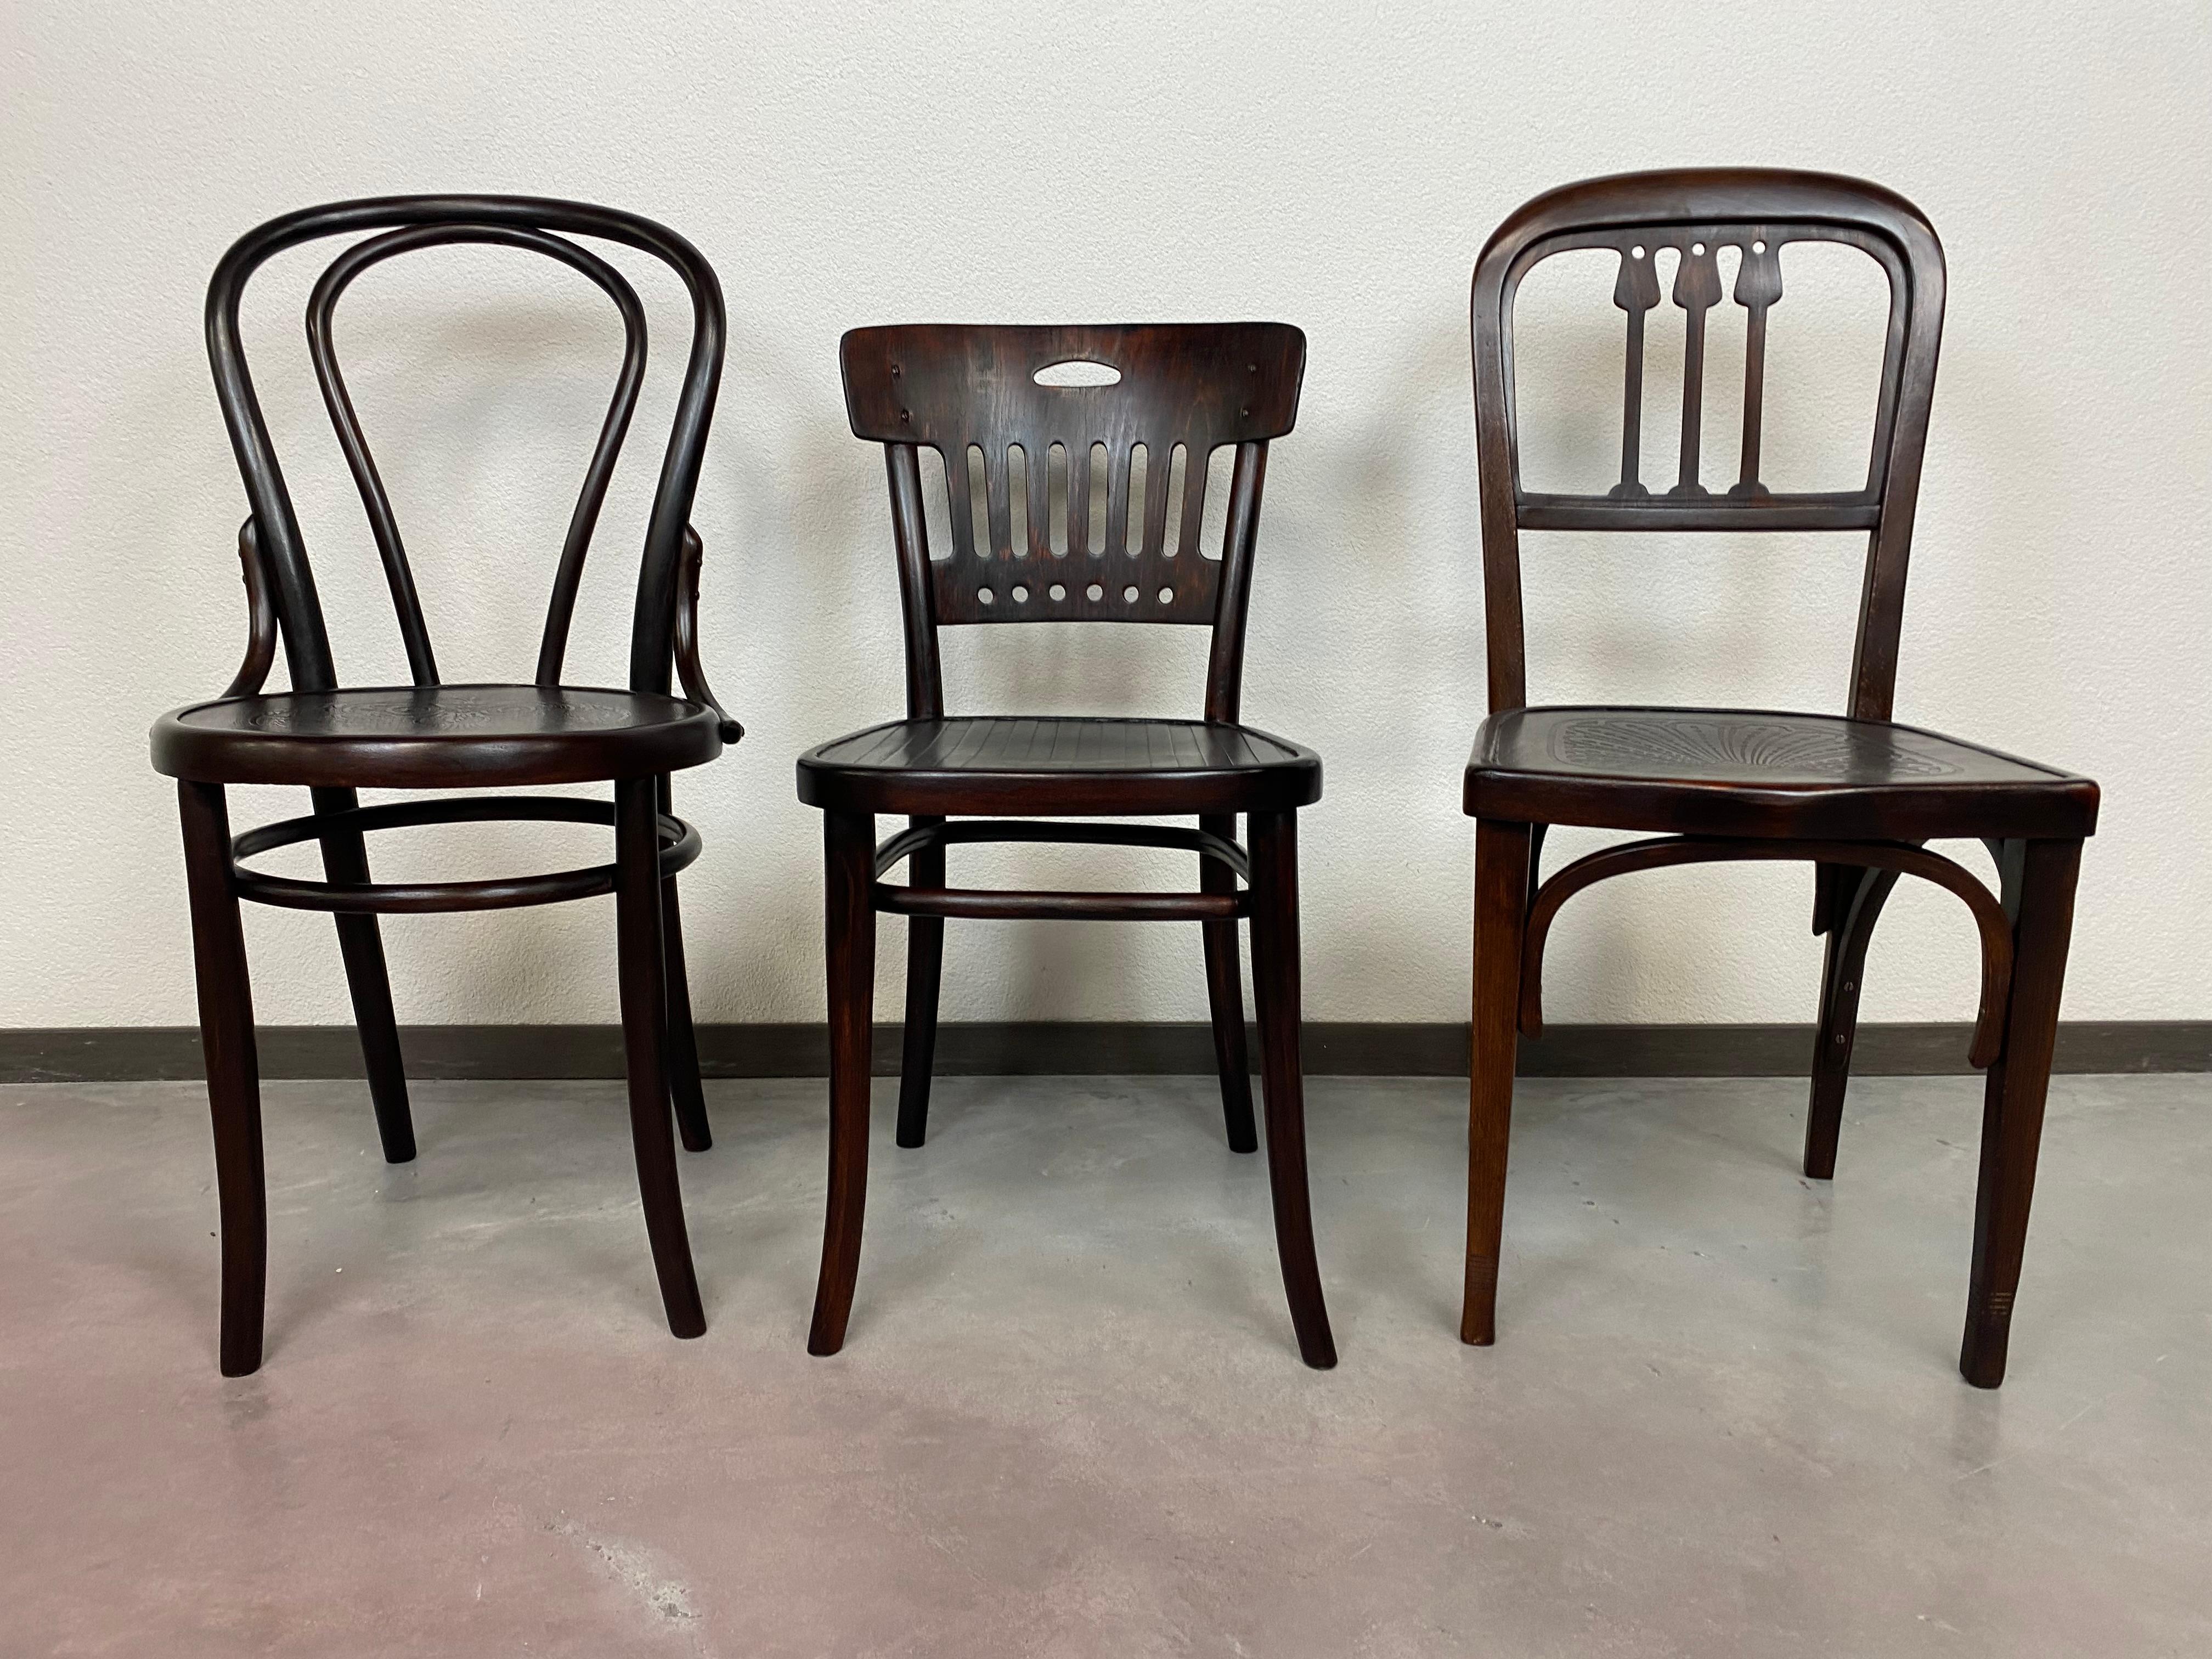 Secession dining chair no.335 by Thonet. Professionally stained and repolished.